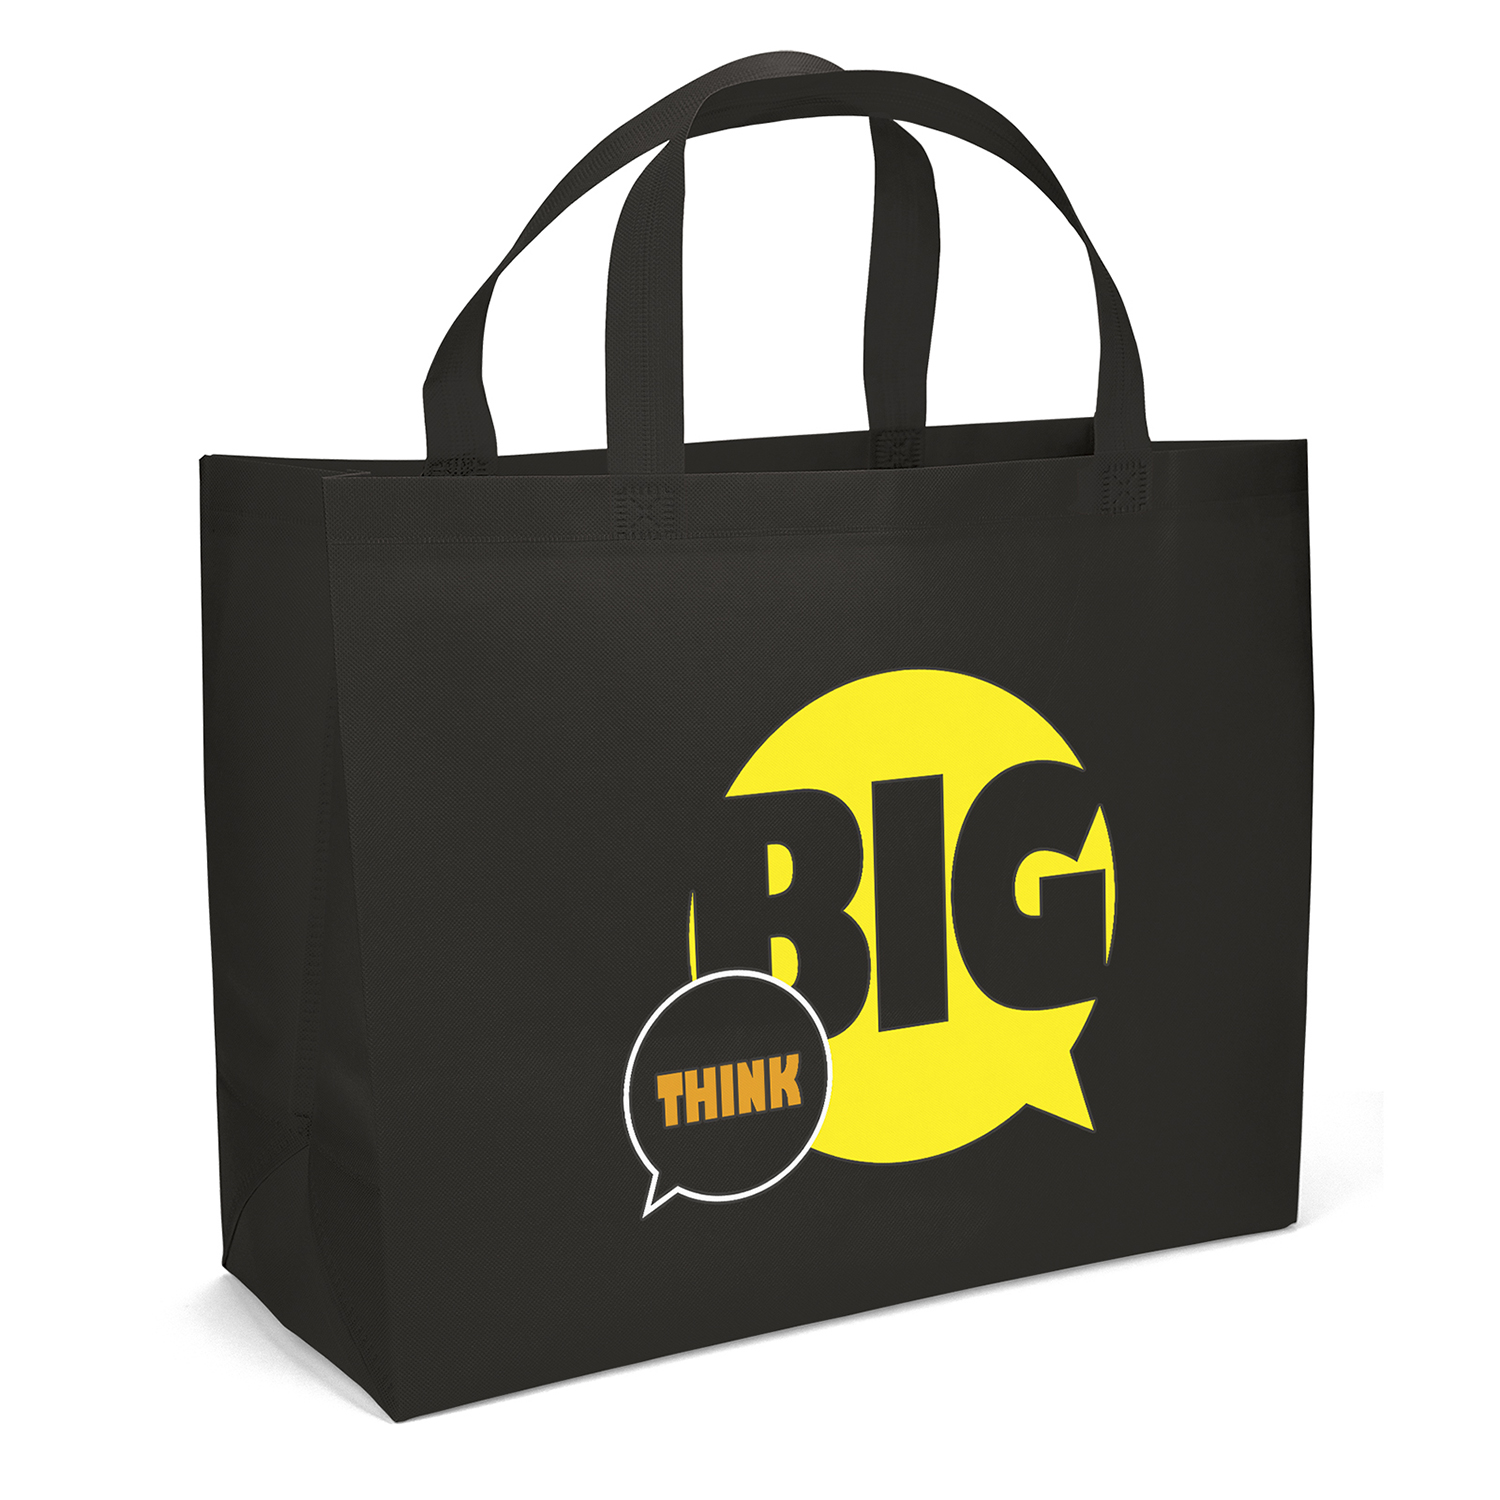 Bag Makers CVSV218 - Custom Printed Eco-Friendly Promotional Non-Woven Grocery Tote Bag